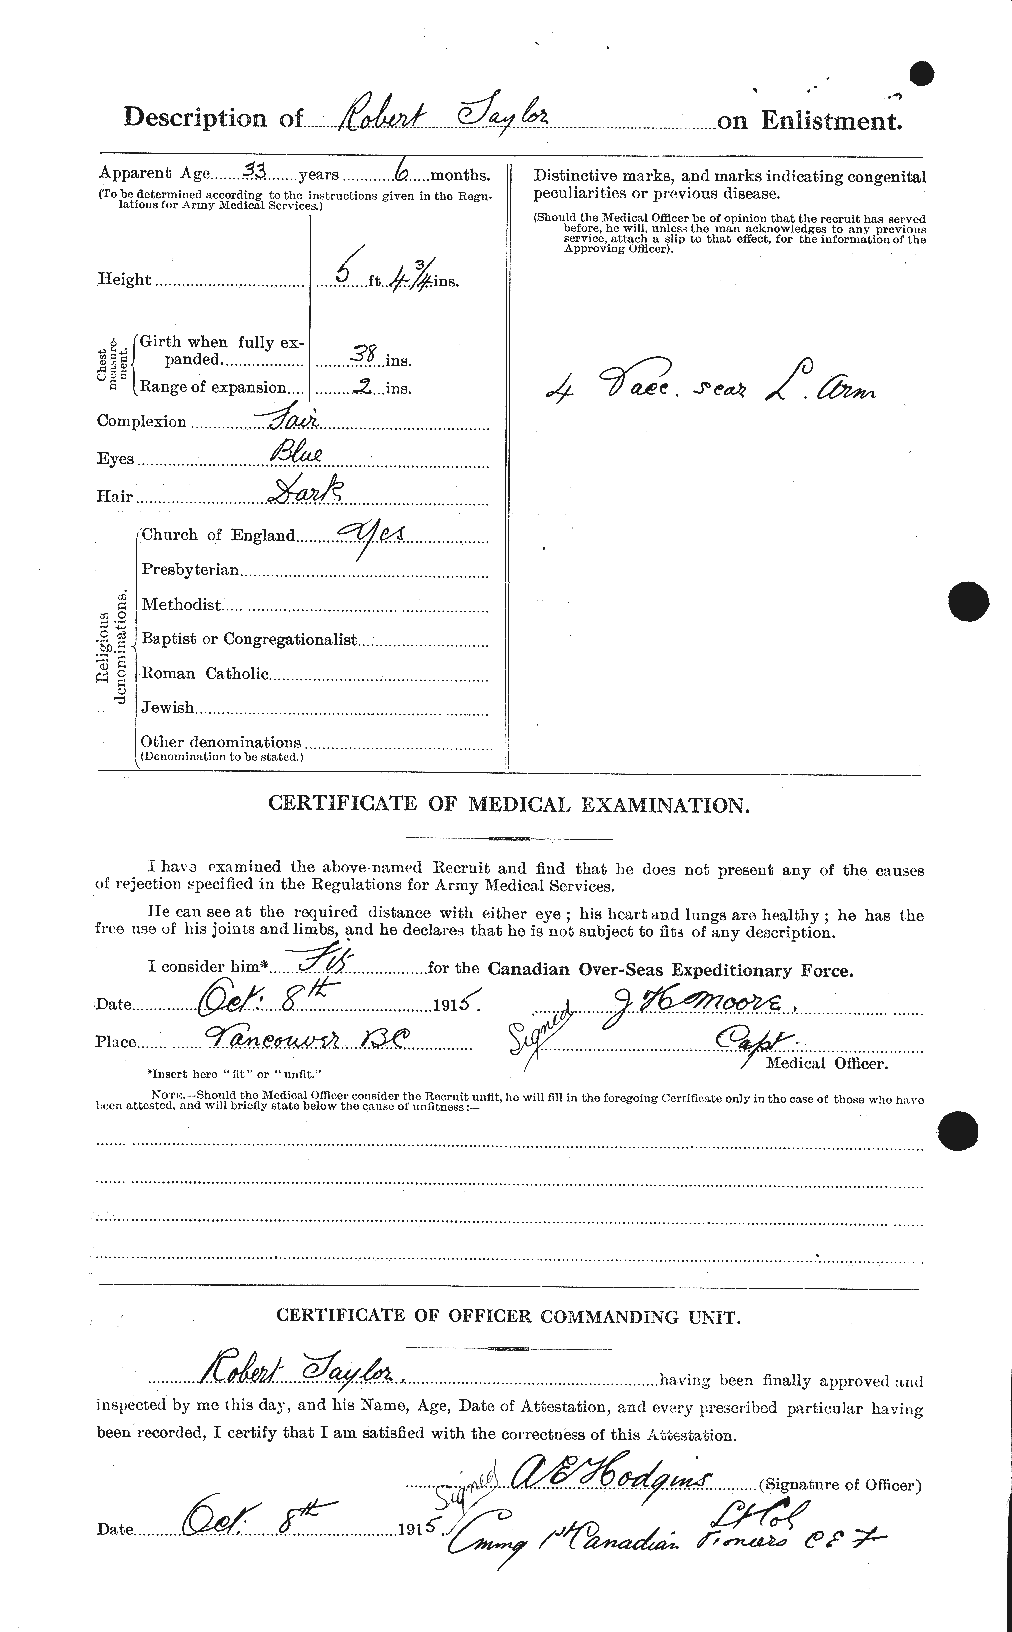 Personnel Records of the First World War - CEF 627446b